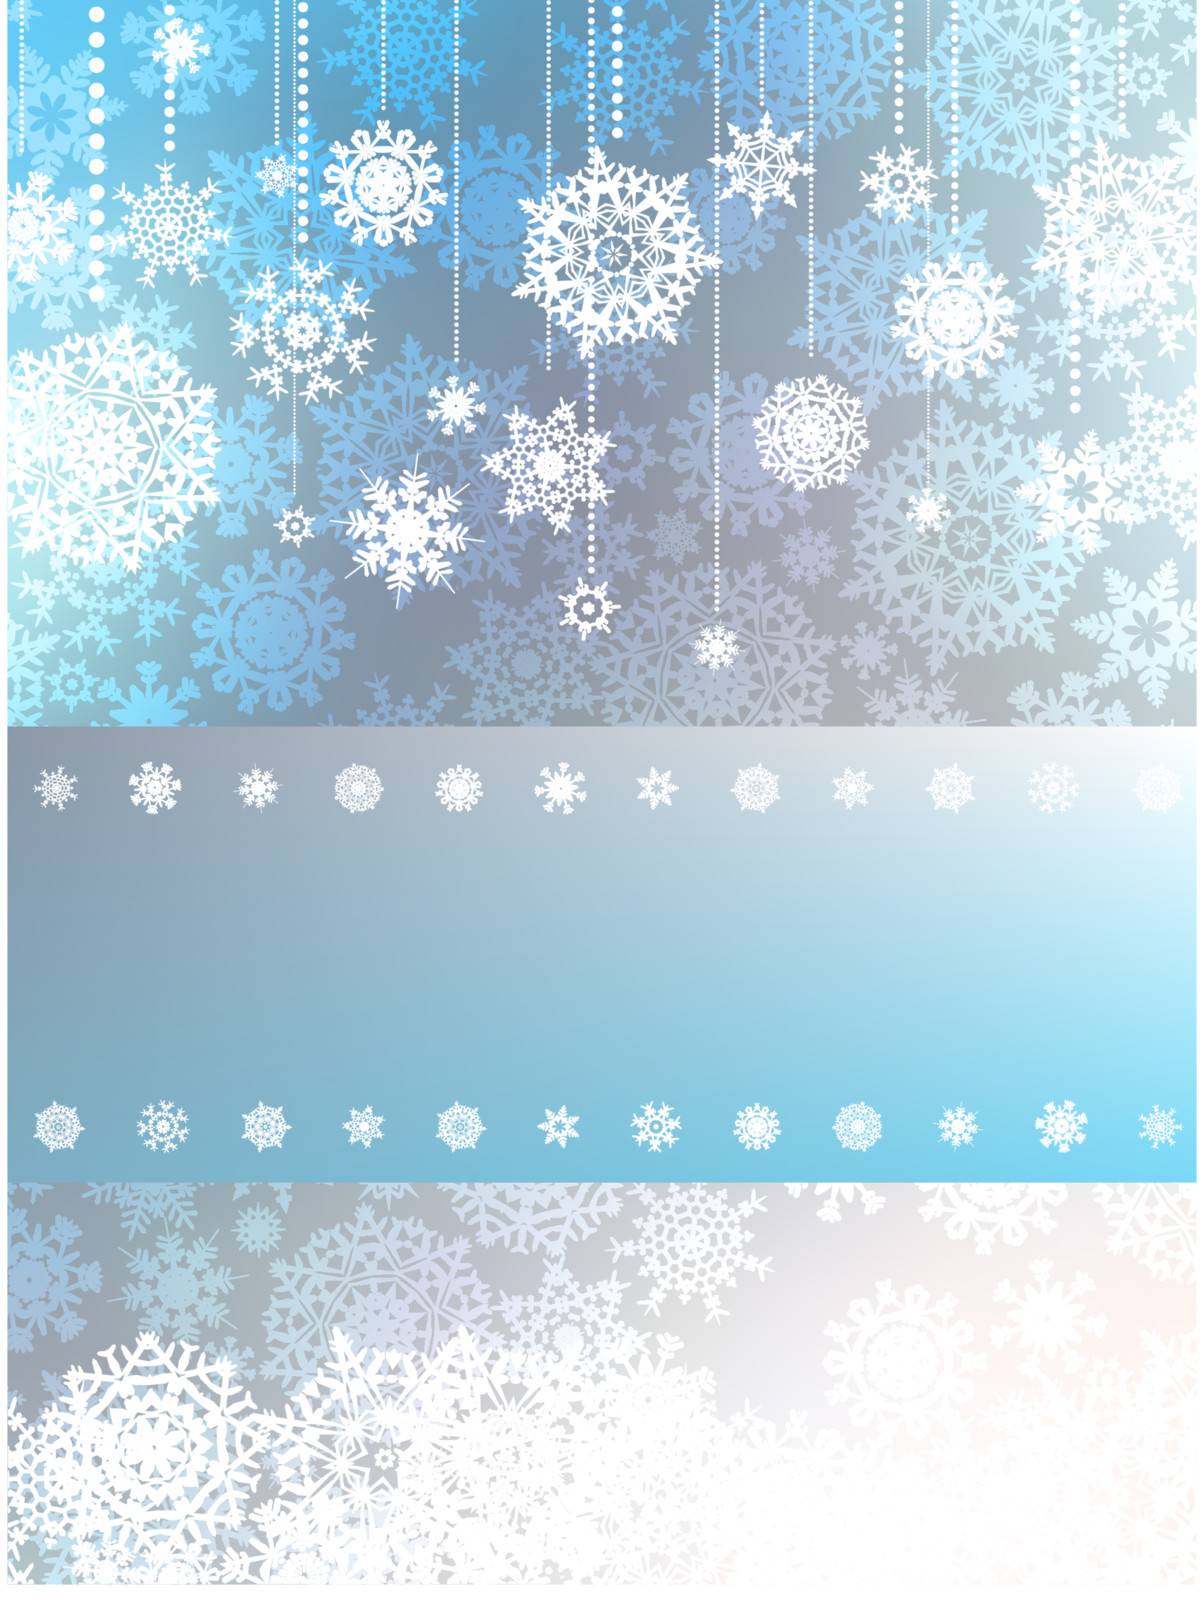 Blue christmas background with snowflake. EPS 8 by Petrov_Vladimir